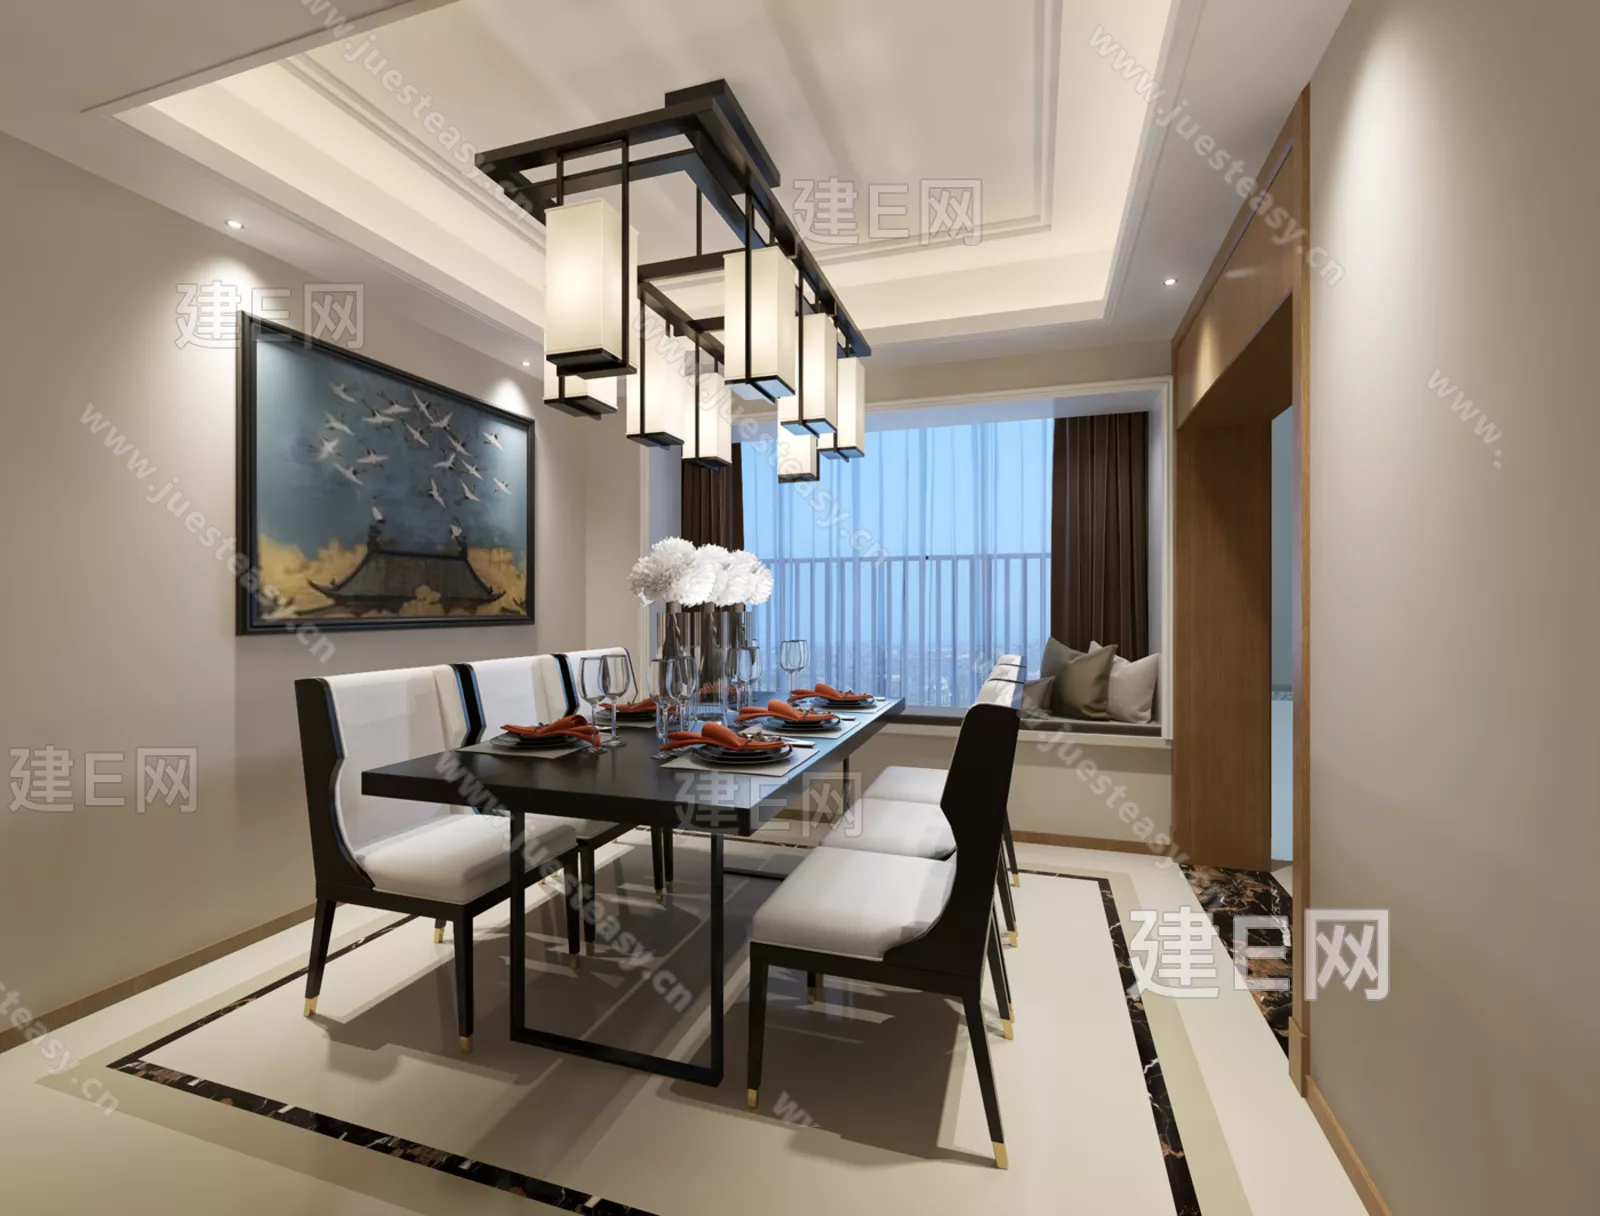 CHINESE DINING ROOM - SKETCHUP 3D SCENE - ENSCAPE - 112741718